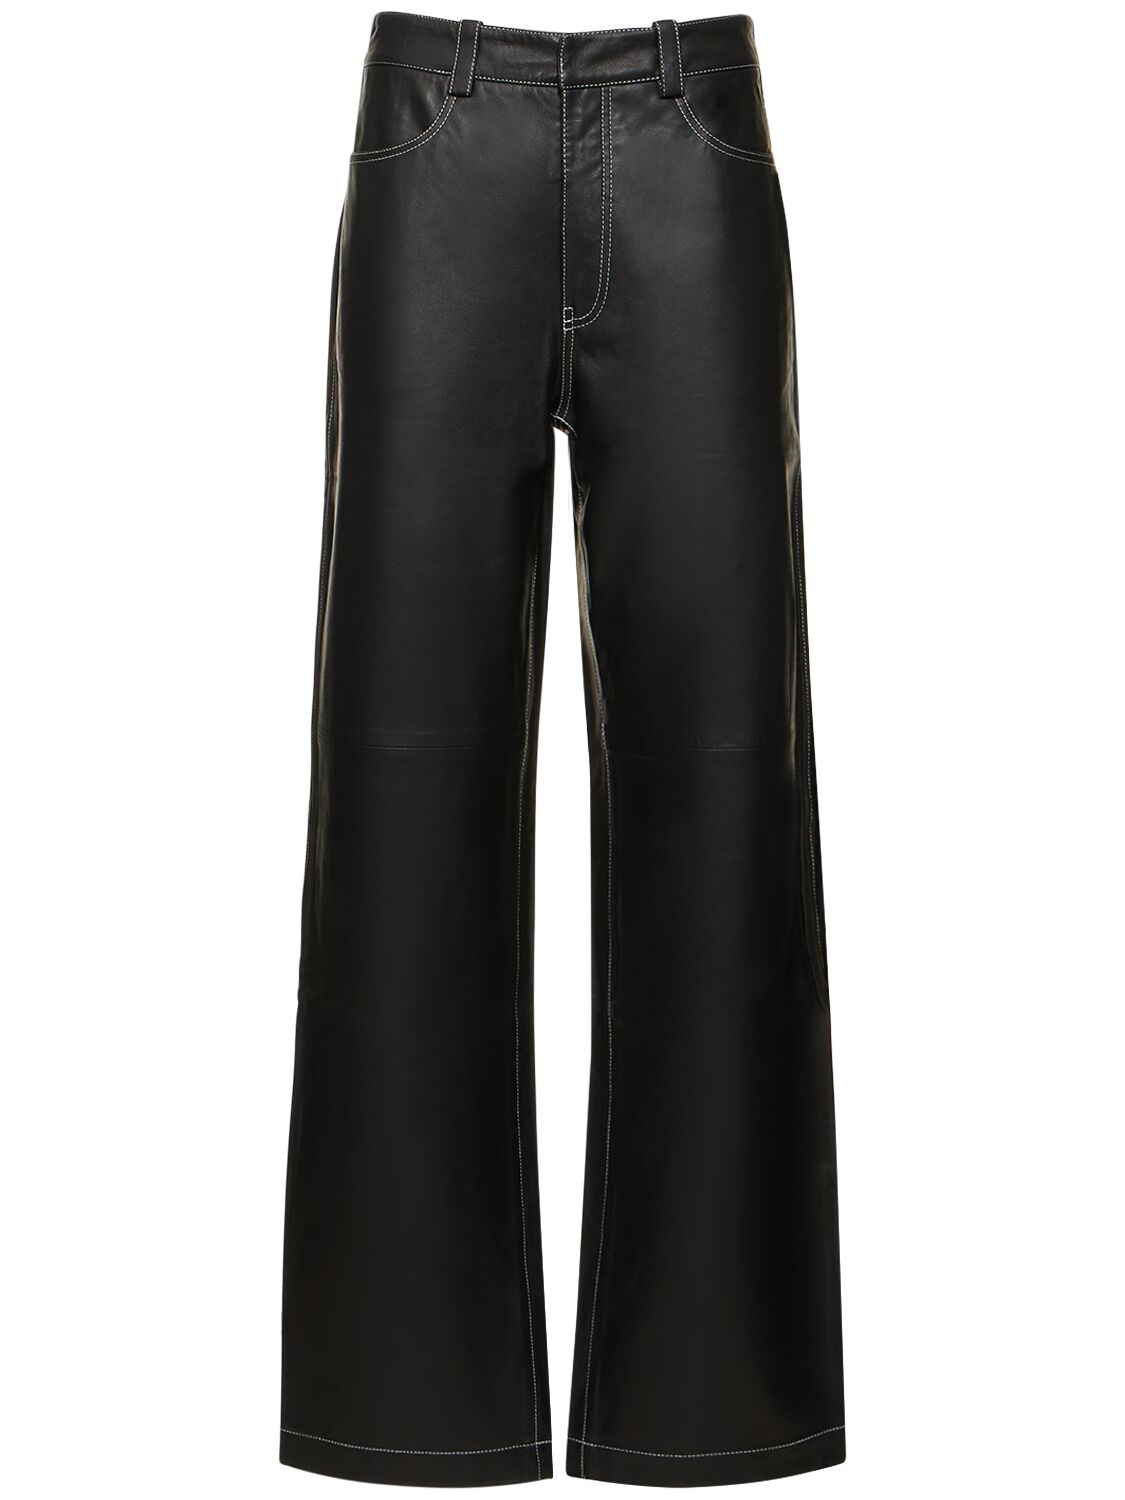 AXEL ARIGATO SPENCER LEATHER PANTS